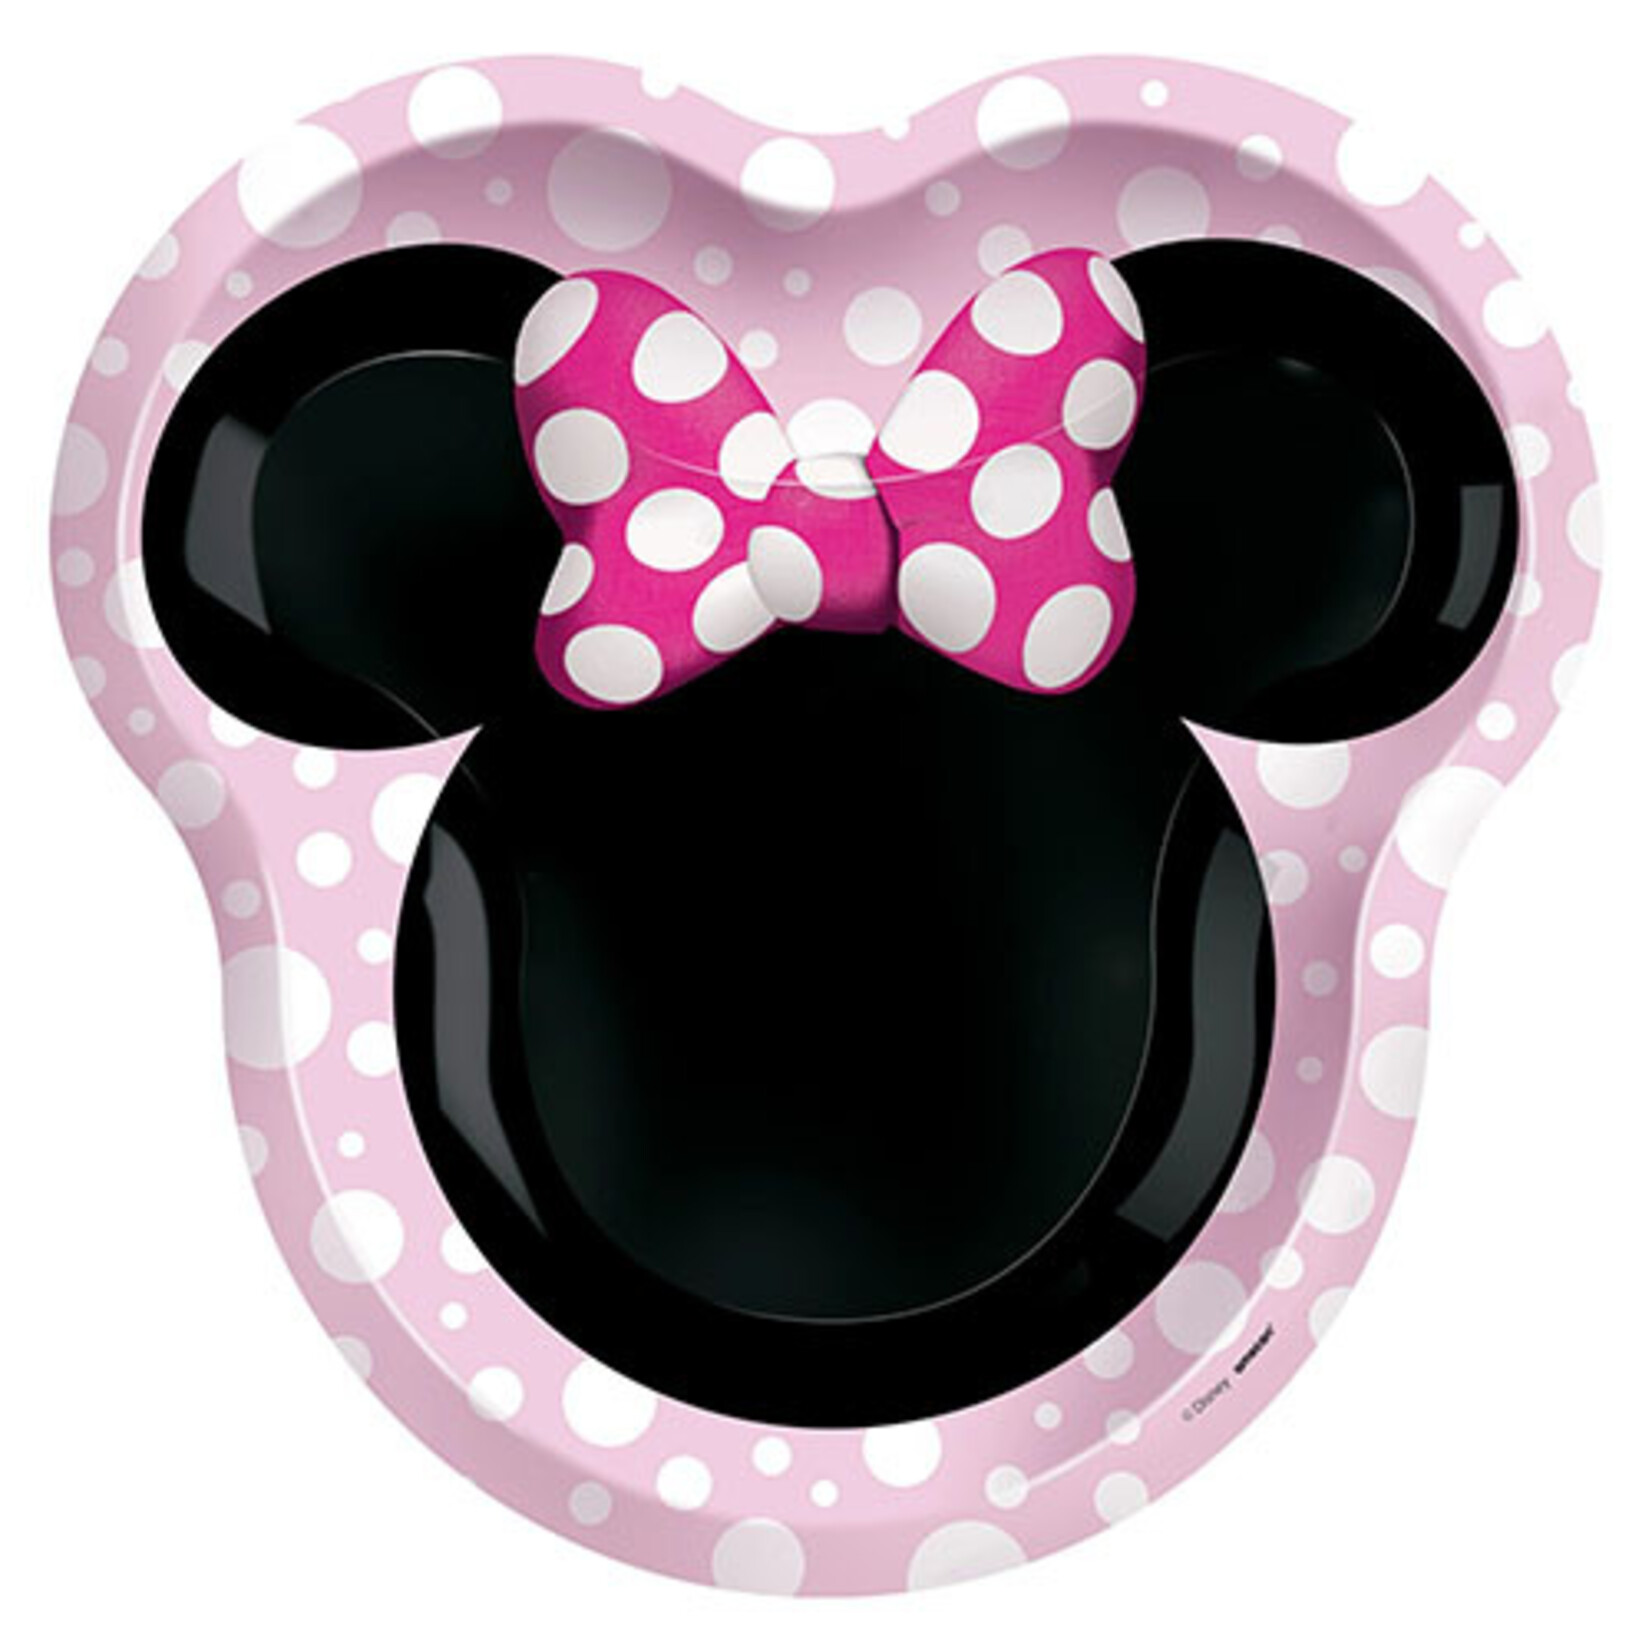 Amscan 10" Minnie Mouse Shaped Plates - 8ct.